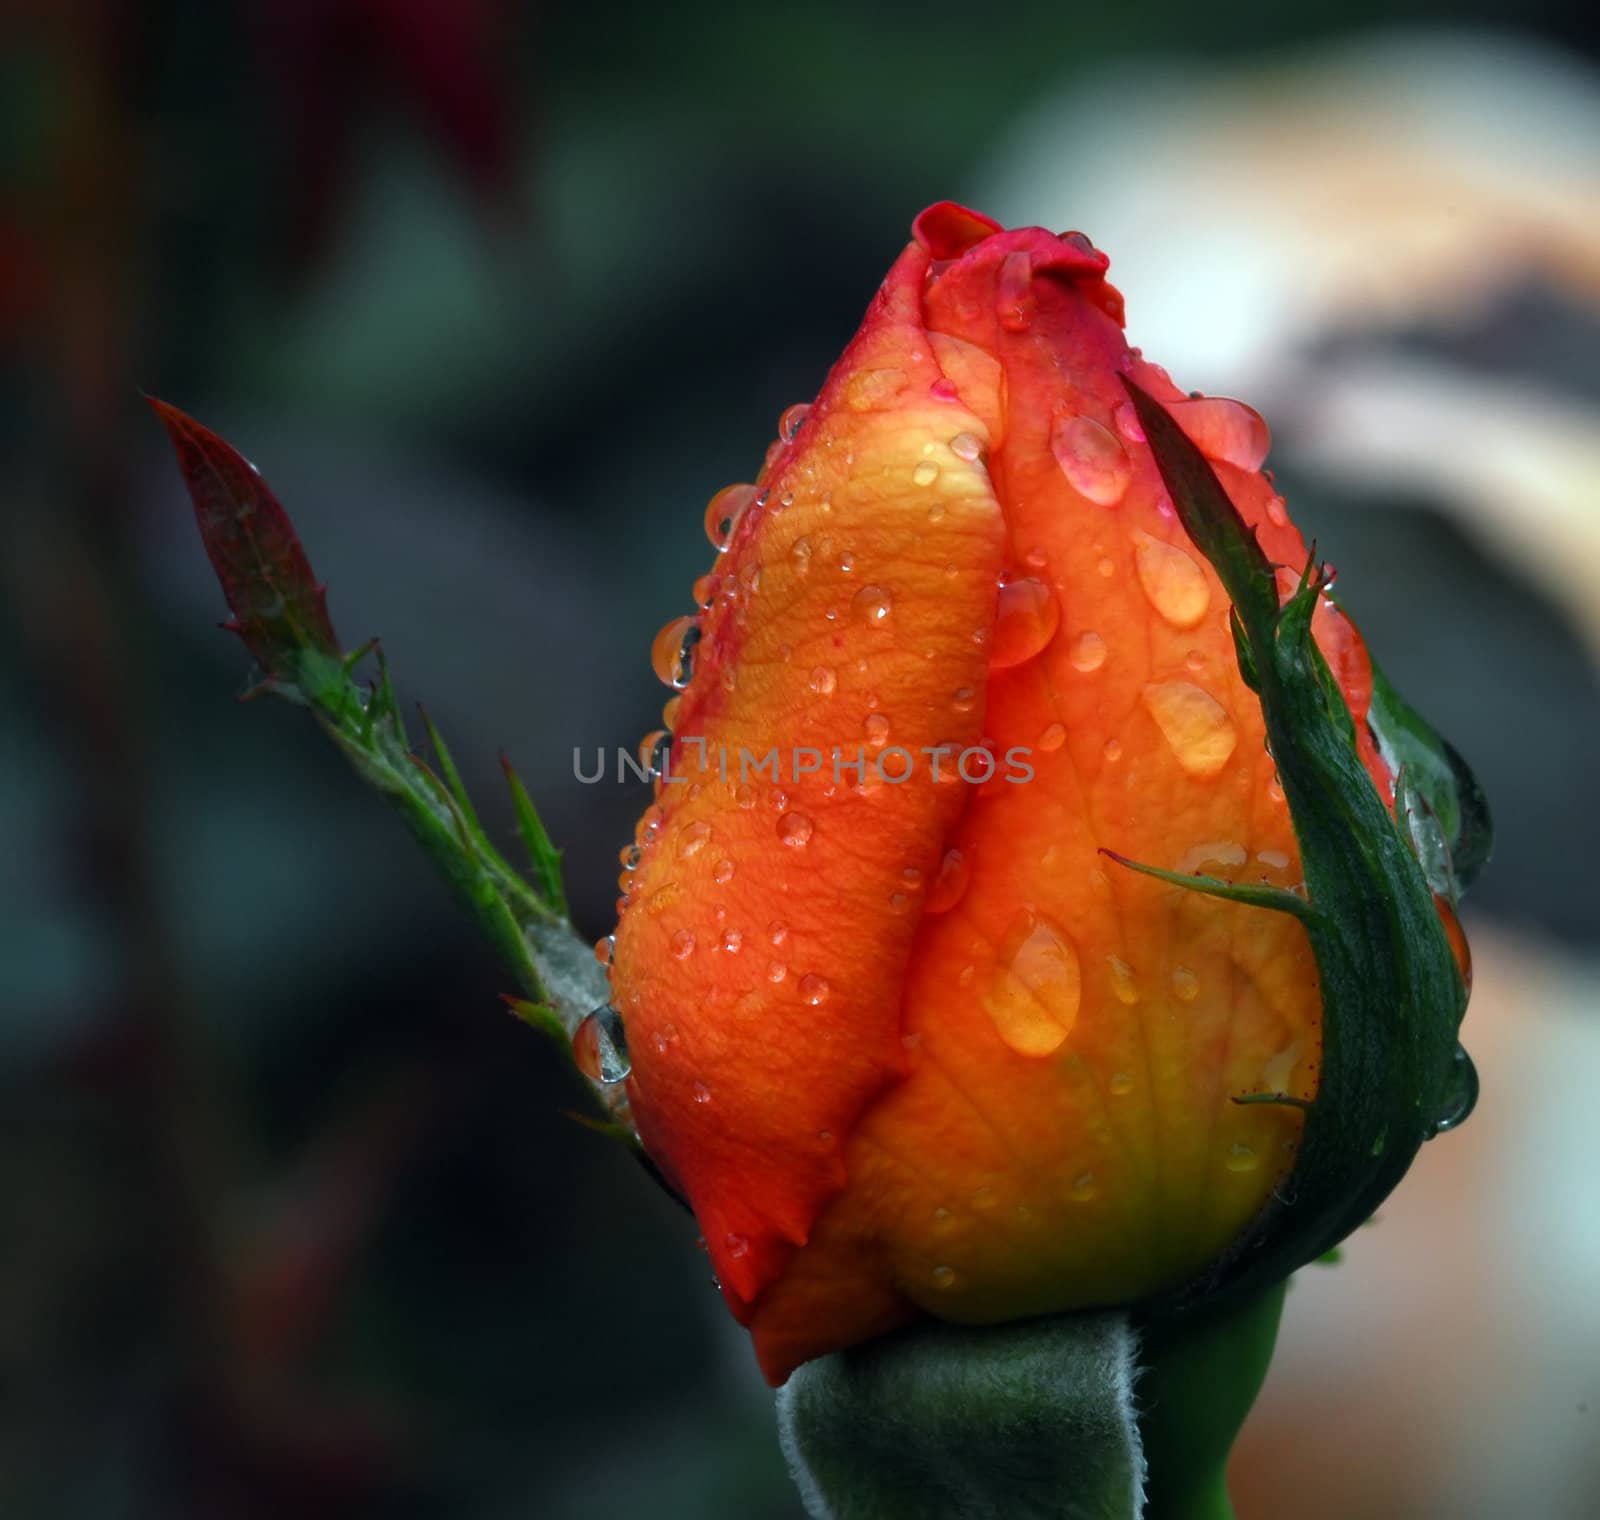 Close-up picture of an orange rose's bud covered with water droplets